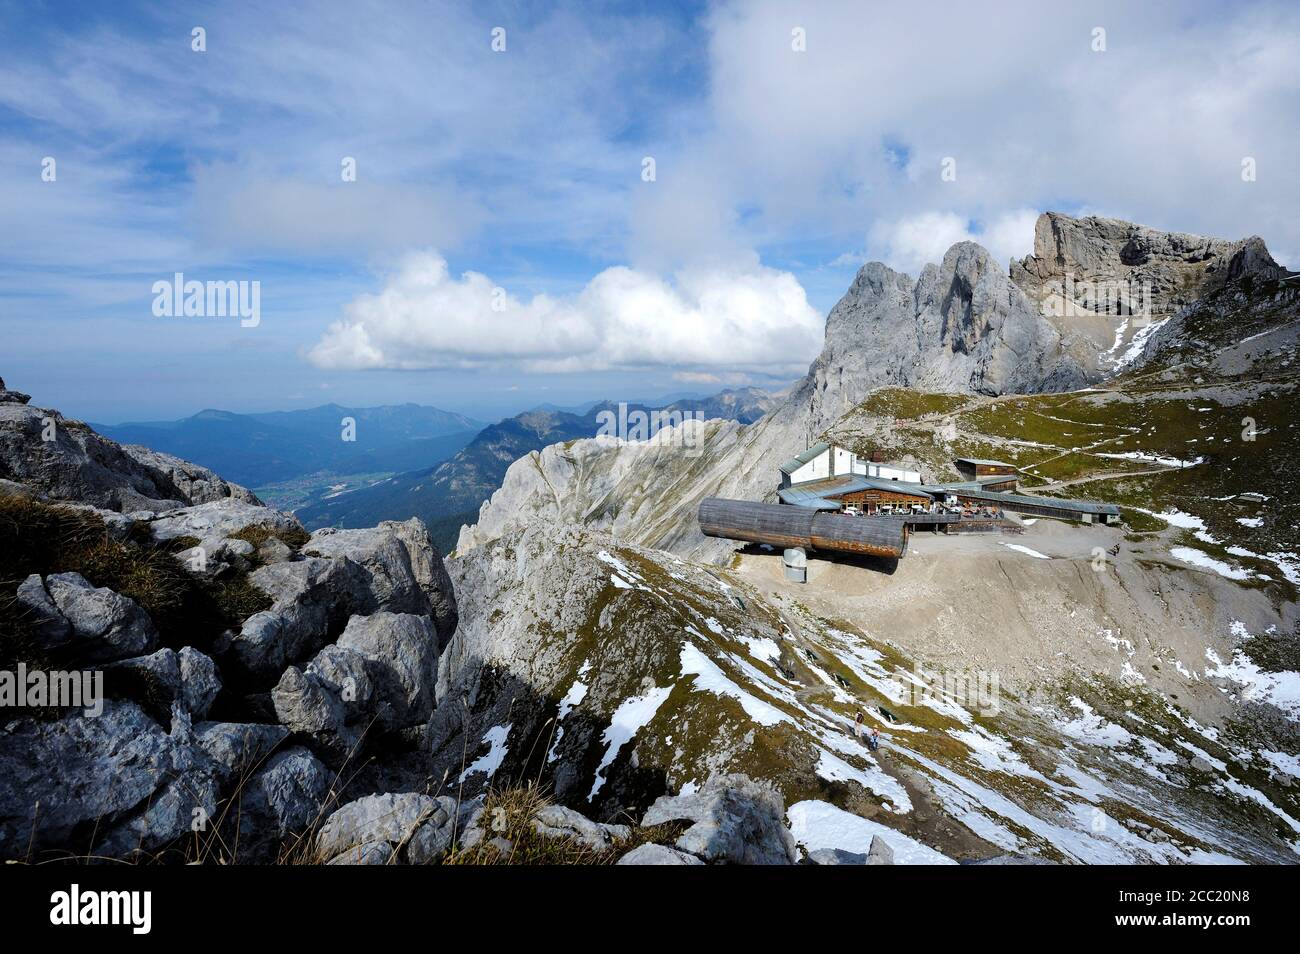 Germany, Bavaria, Nature information center, View of telescope at karwendel mountains Stock Photo